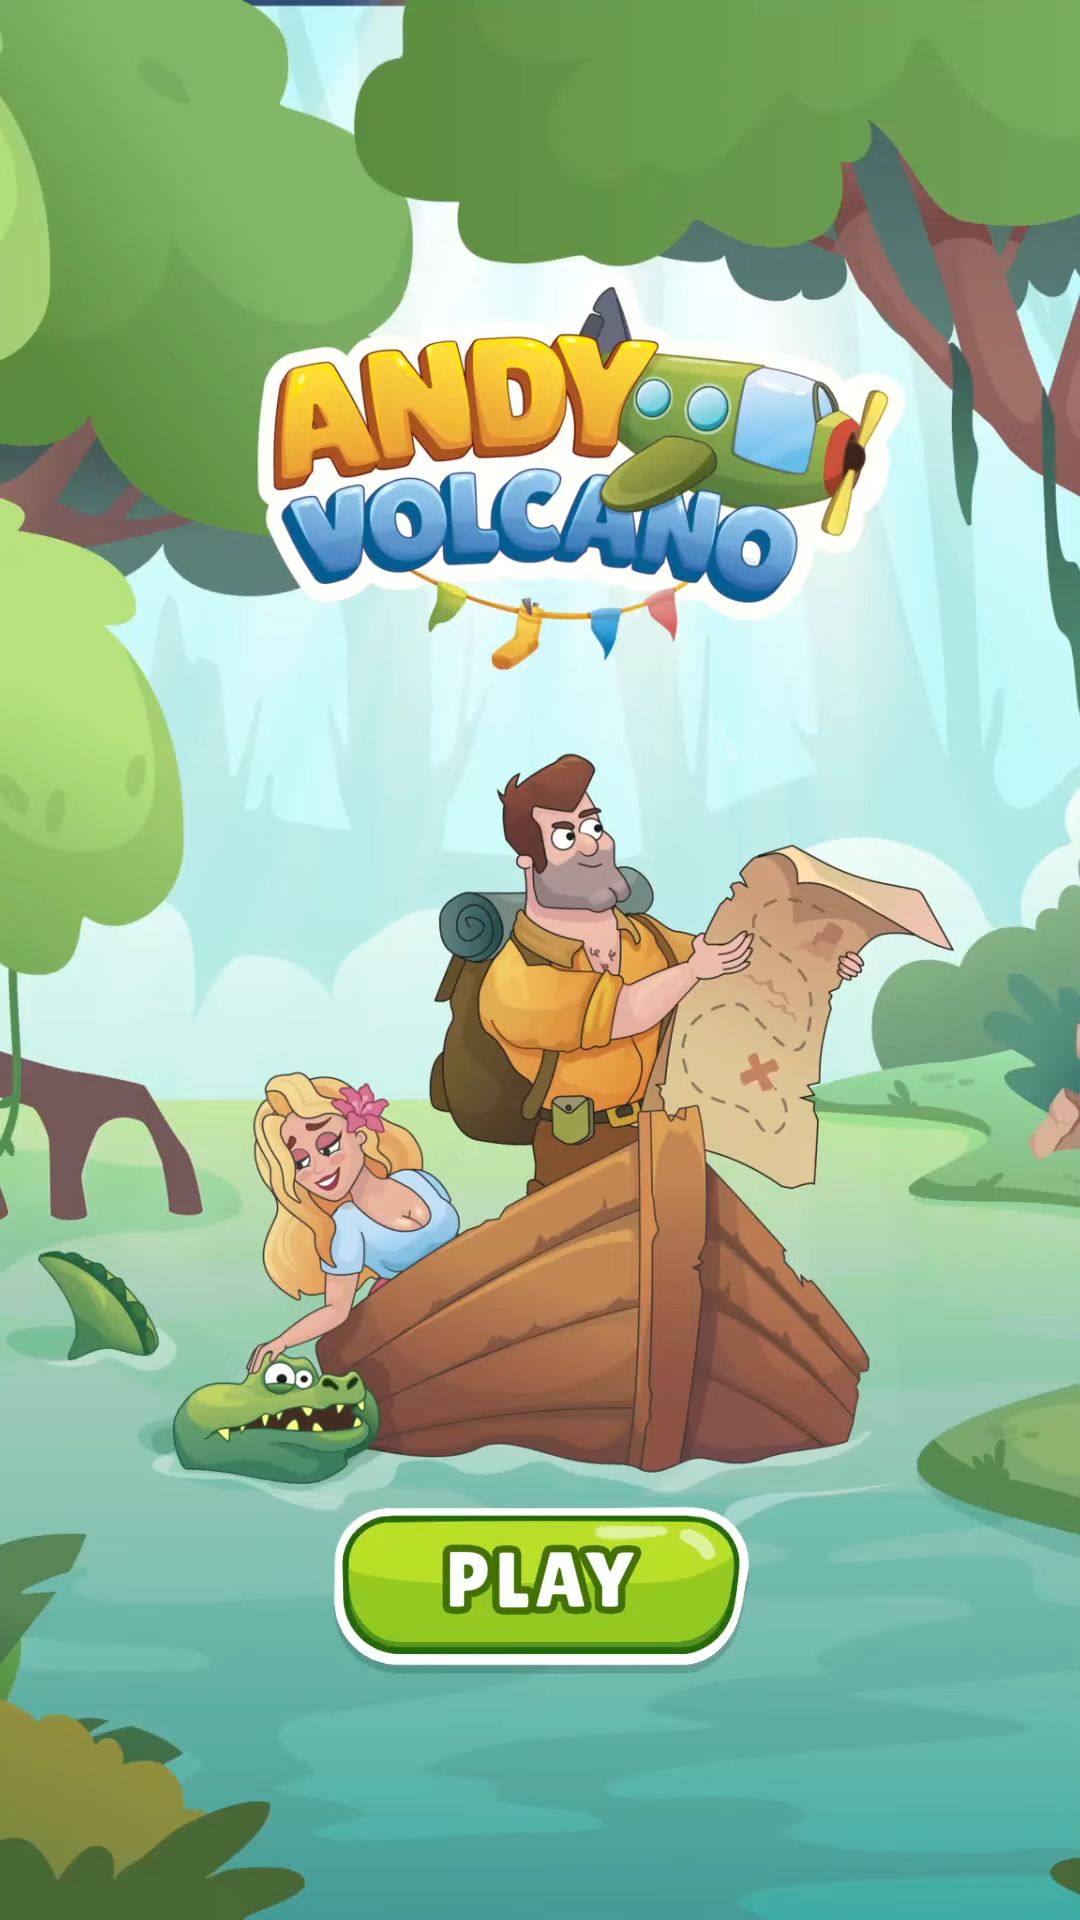 Baixar Andy Volcano: Tile Match Story para Android grátis.